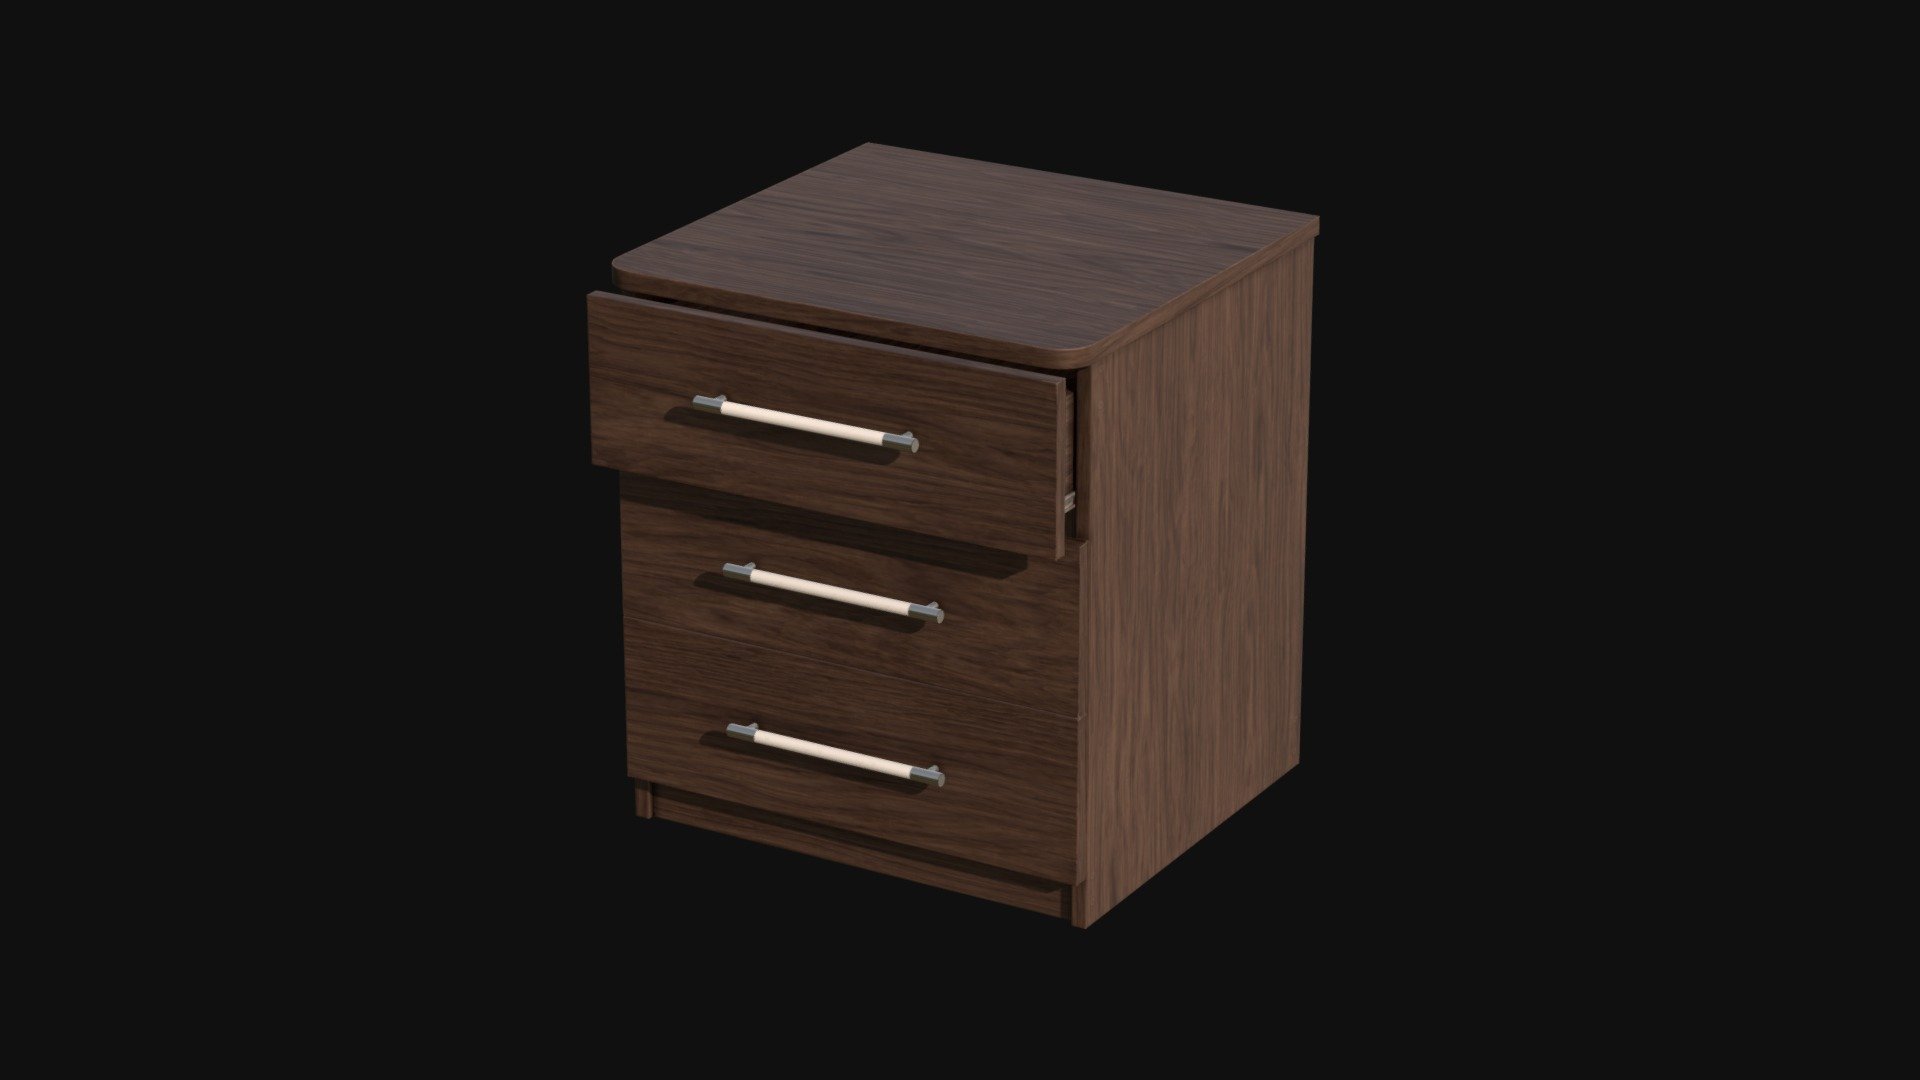 Wooden bedside table. 3D model is ready for use in the game engine and rendering.

PBR GameReady LowPoly

Color 2048x2048
 Metallic 2048x2048
 Roughness 2048x2048
 Normal 2048x2048 - Bedside Table - 3D model by Melon Polygons (@Melonpolygons) 3d model